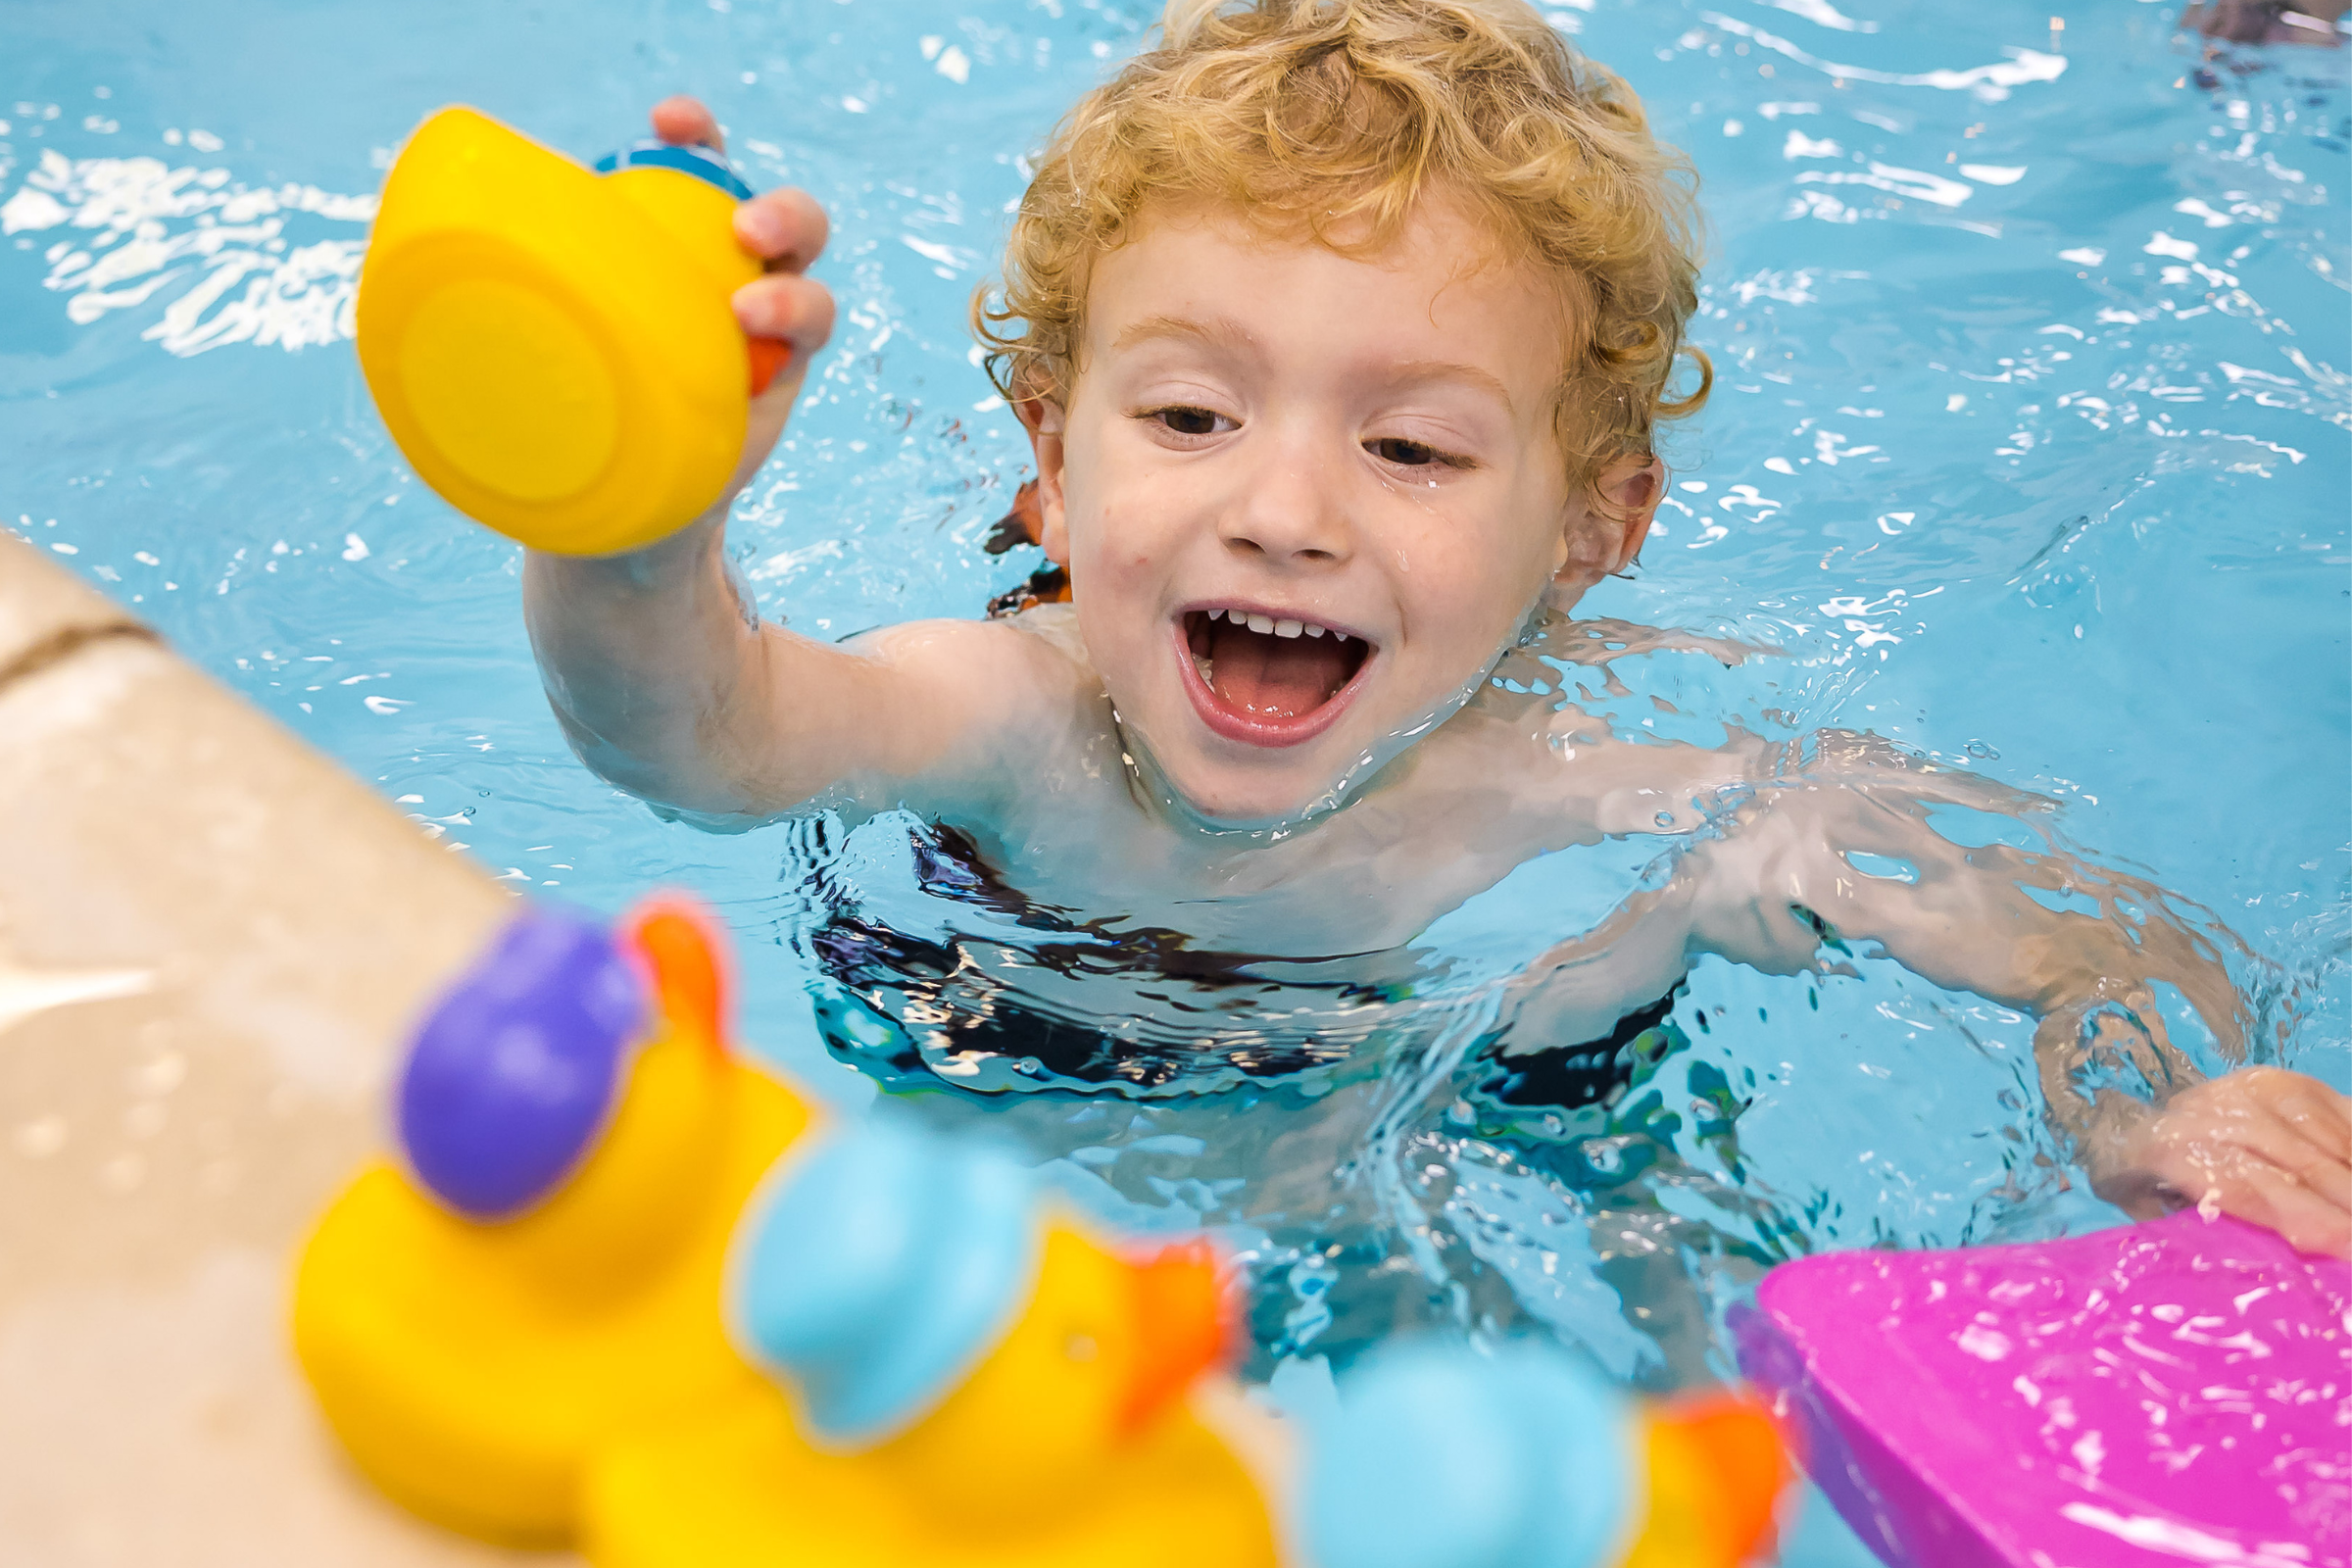 A young boy smiles and places a rubber duck on the side of the swimming pool